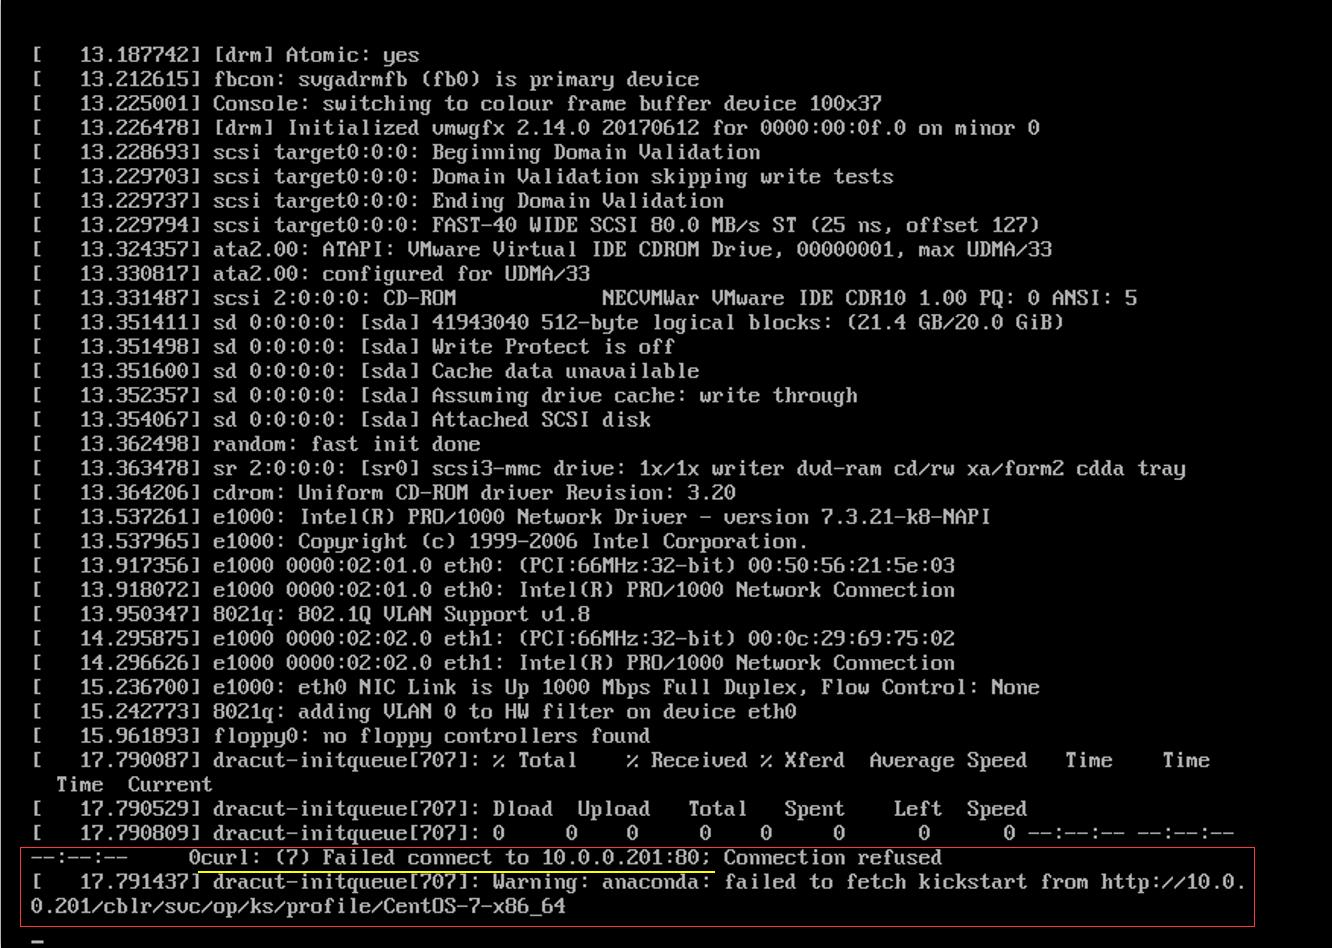 Cobbler安装Linux系统时报错 curl：（7）Failed connect to 10.0.0.201:80；Connection refused - 文章图片